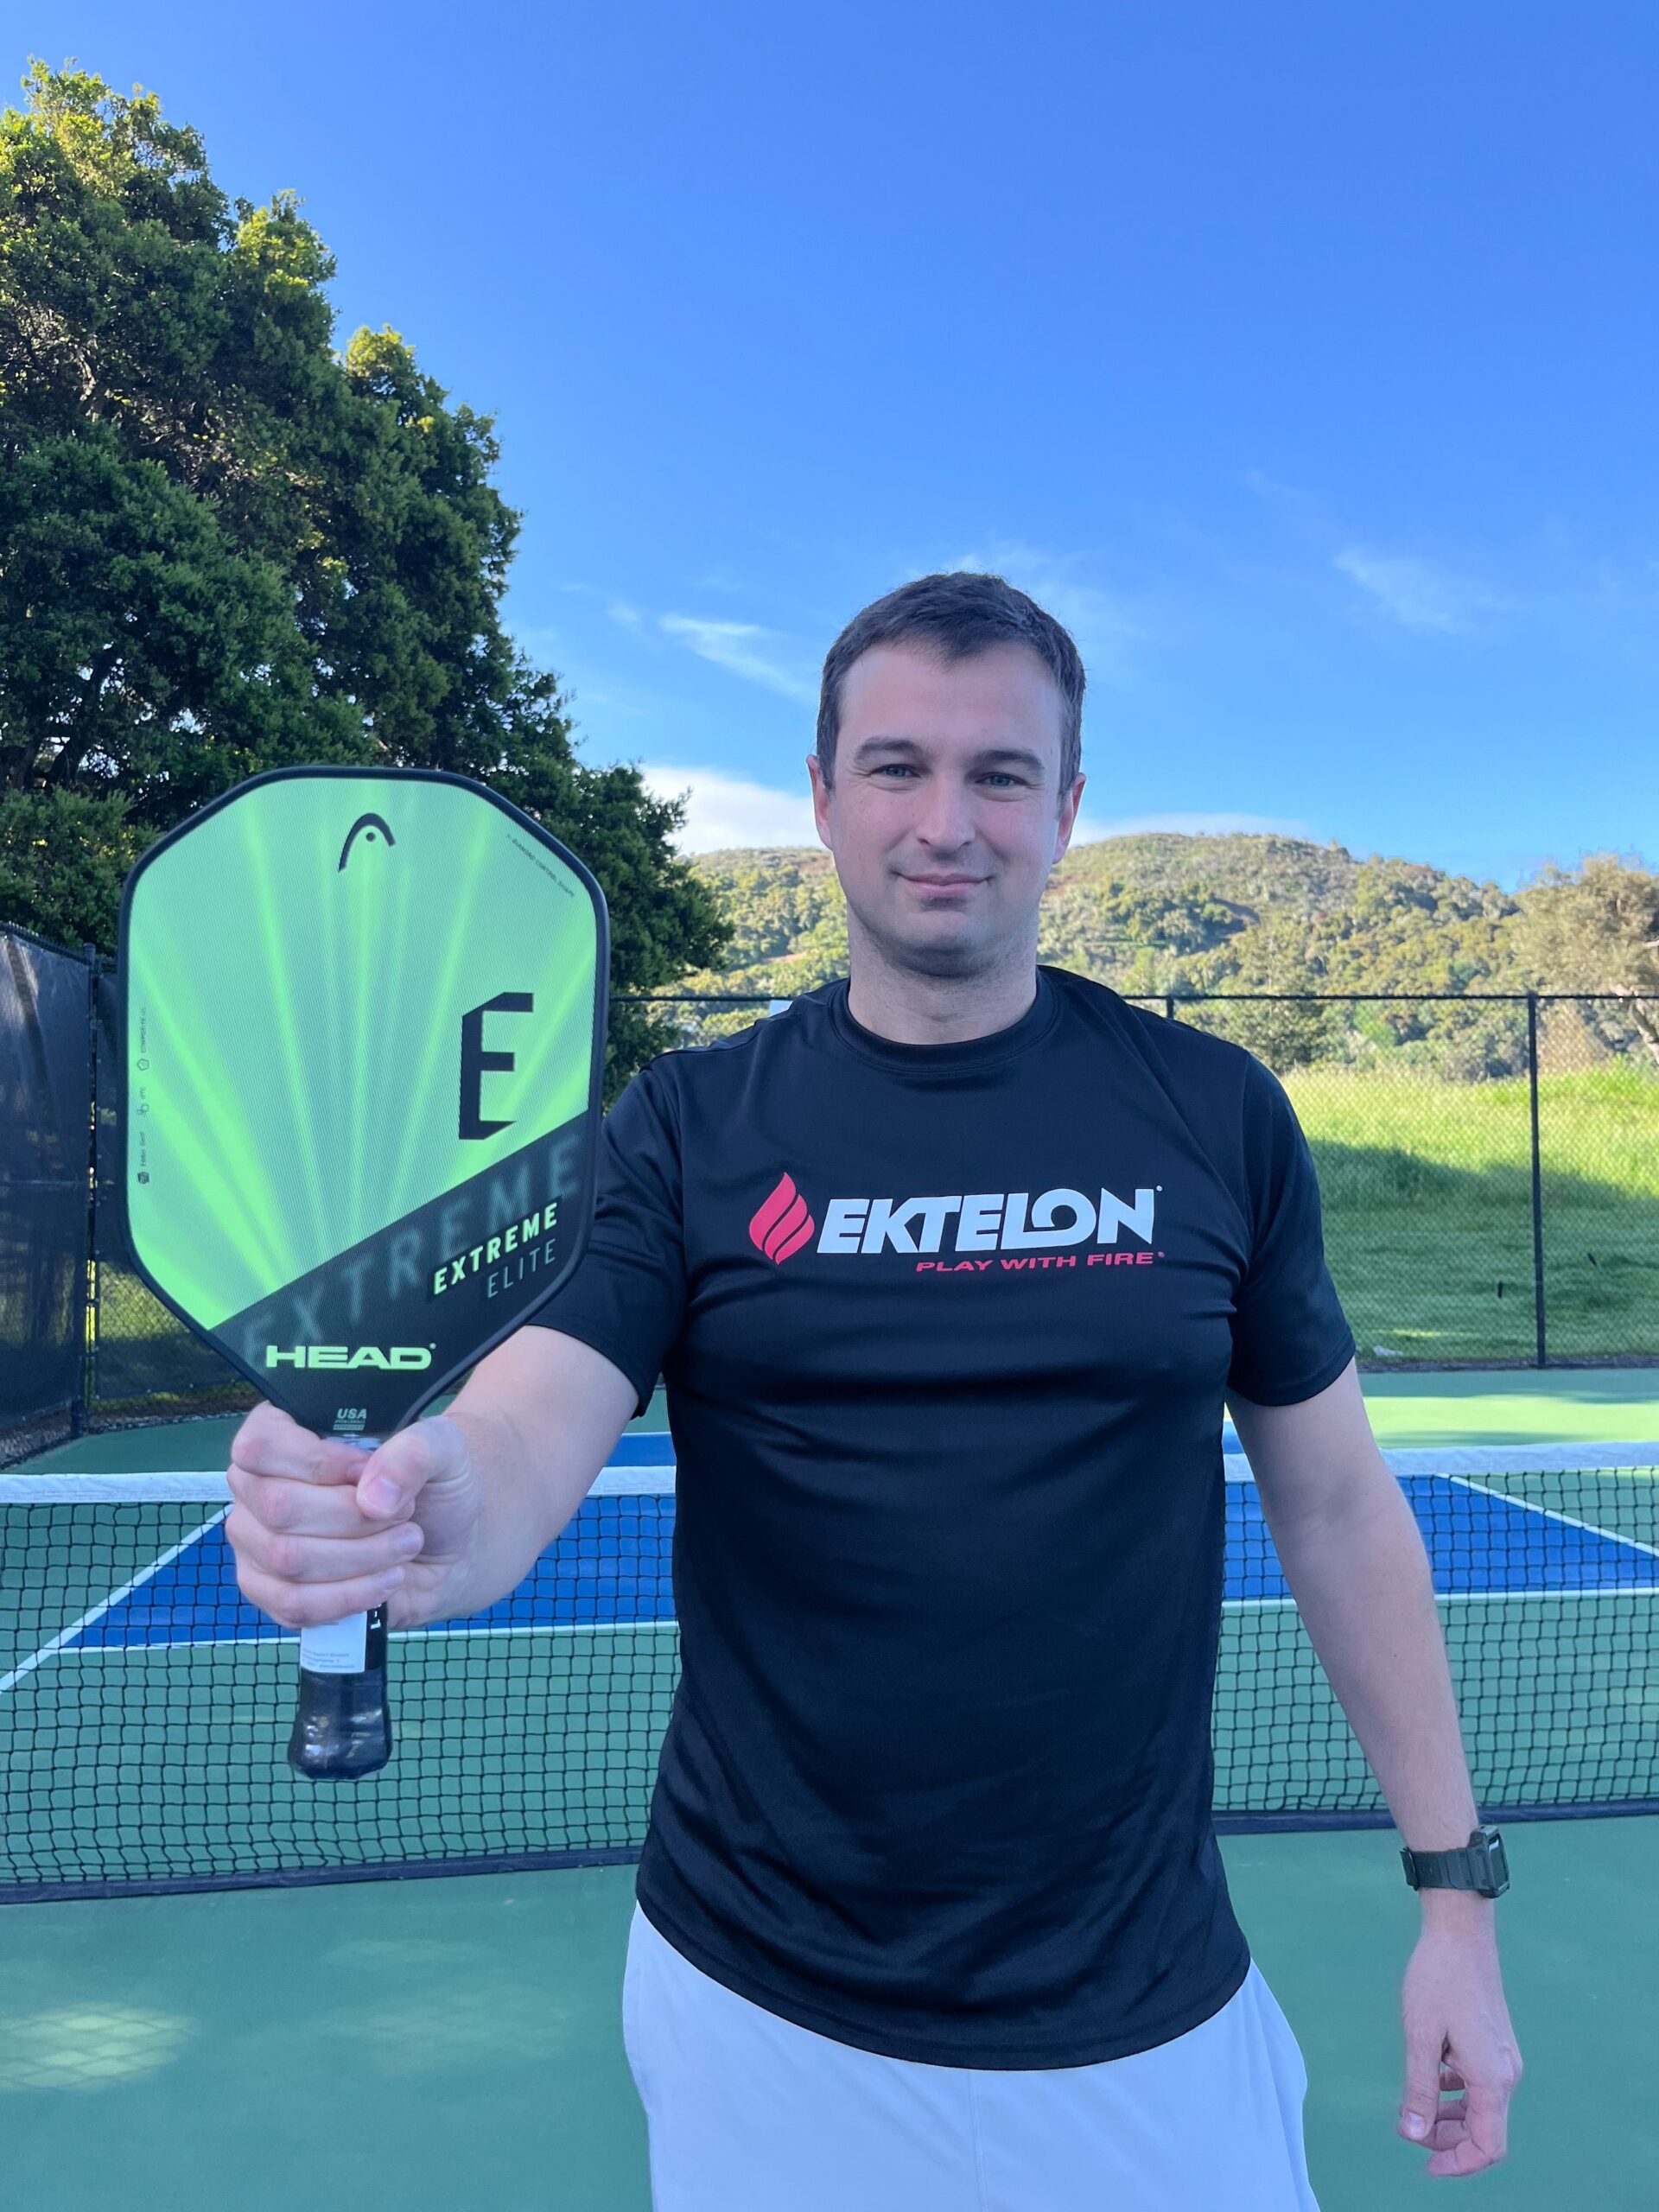 Head Radical Elite Pickleball Paddle Review: Is It Worth It?